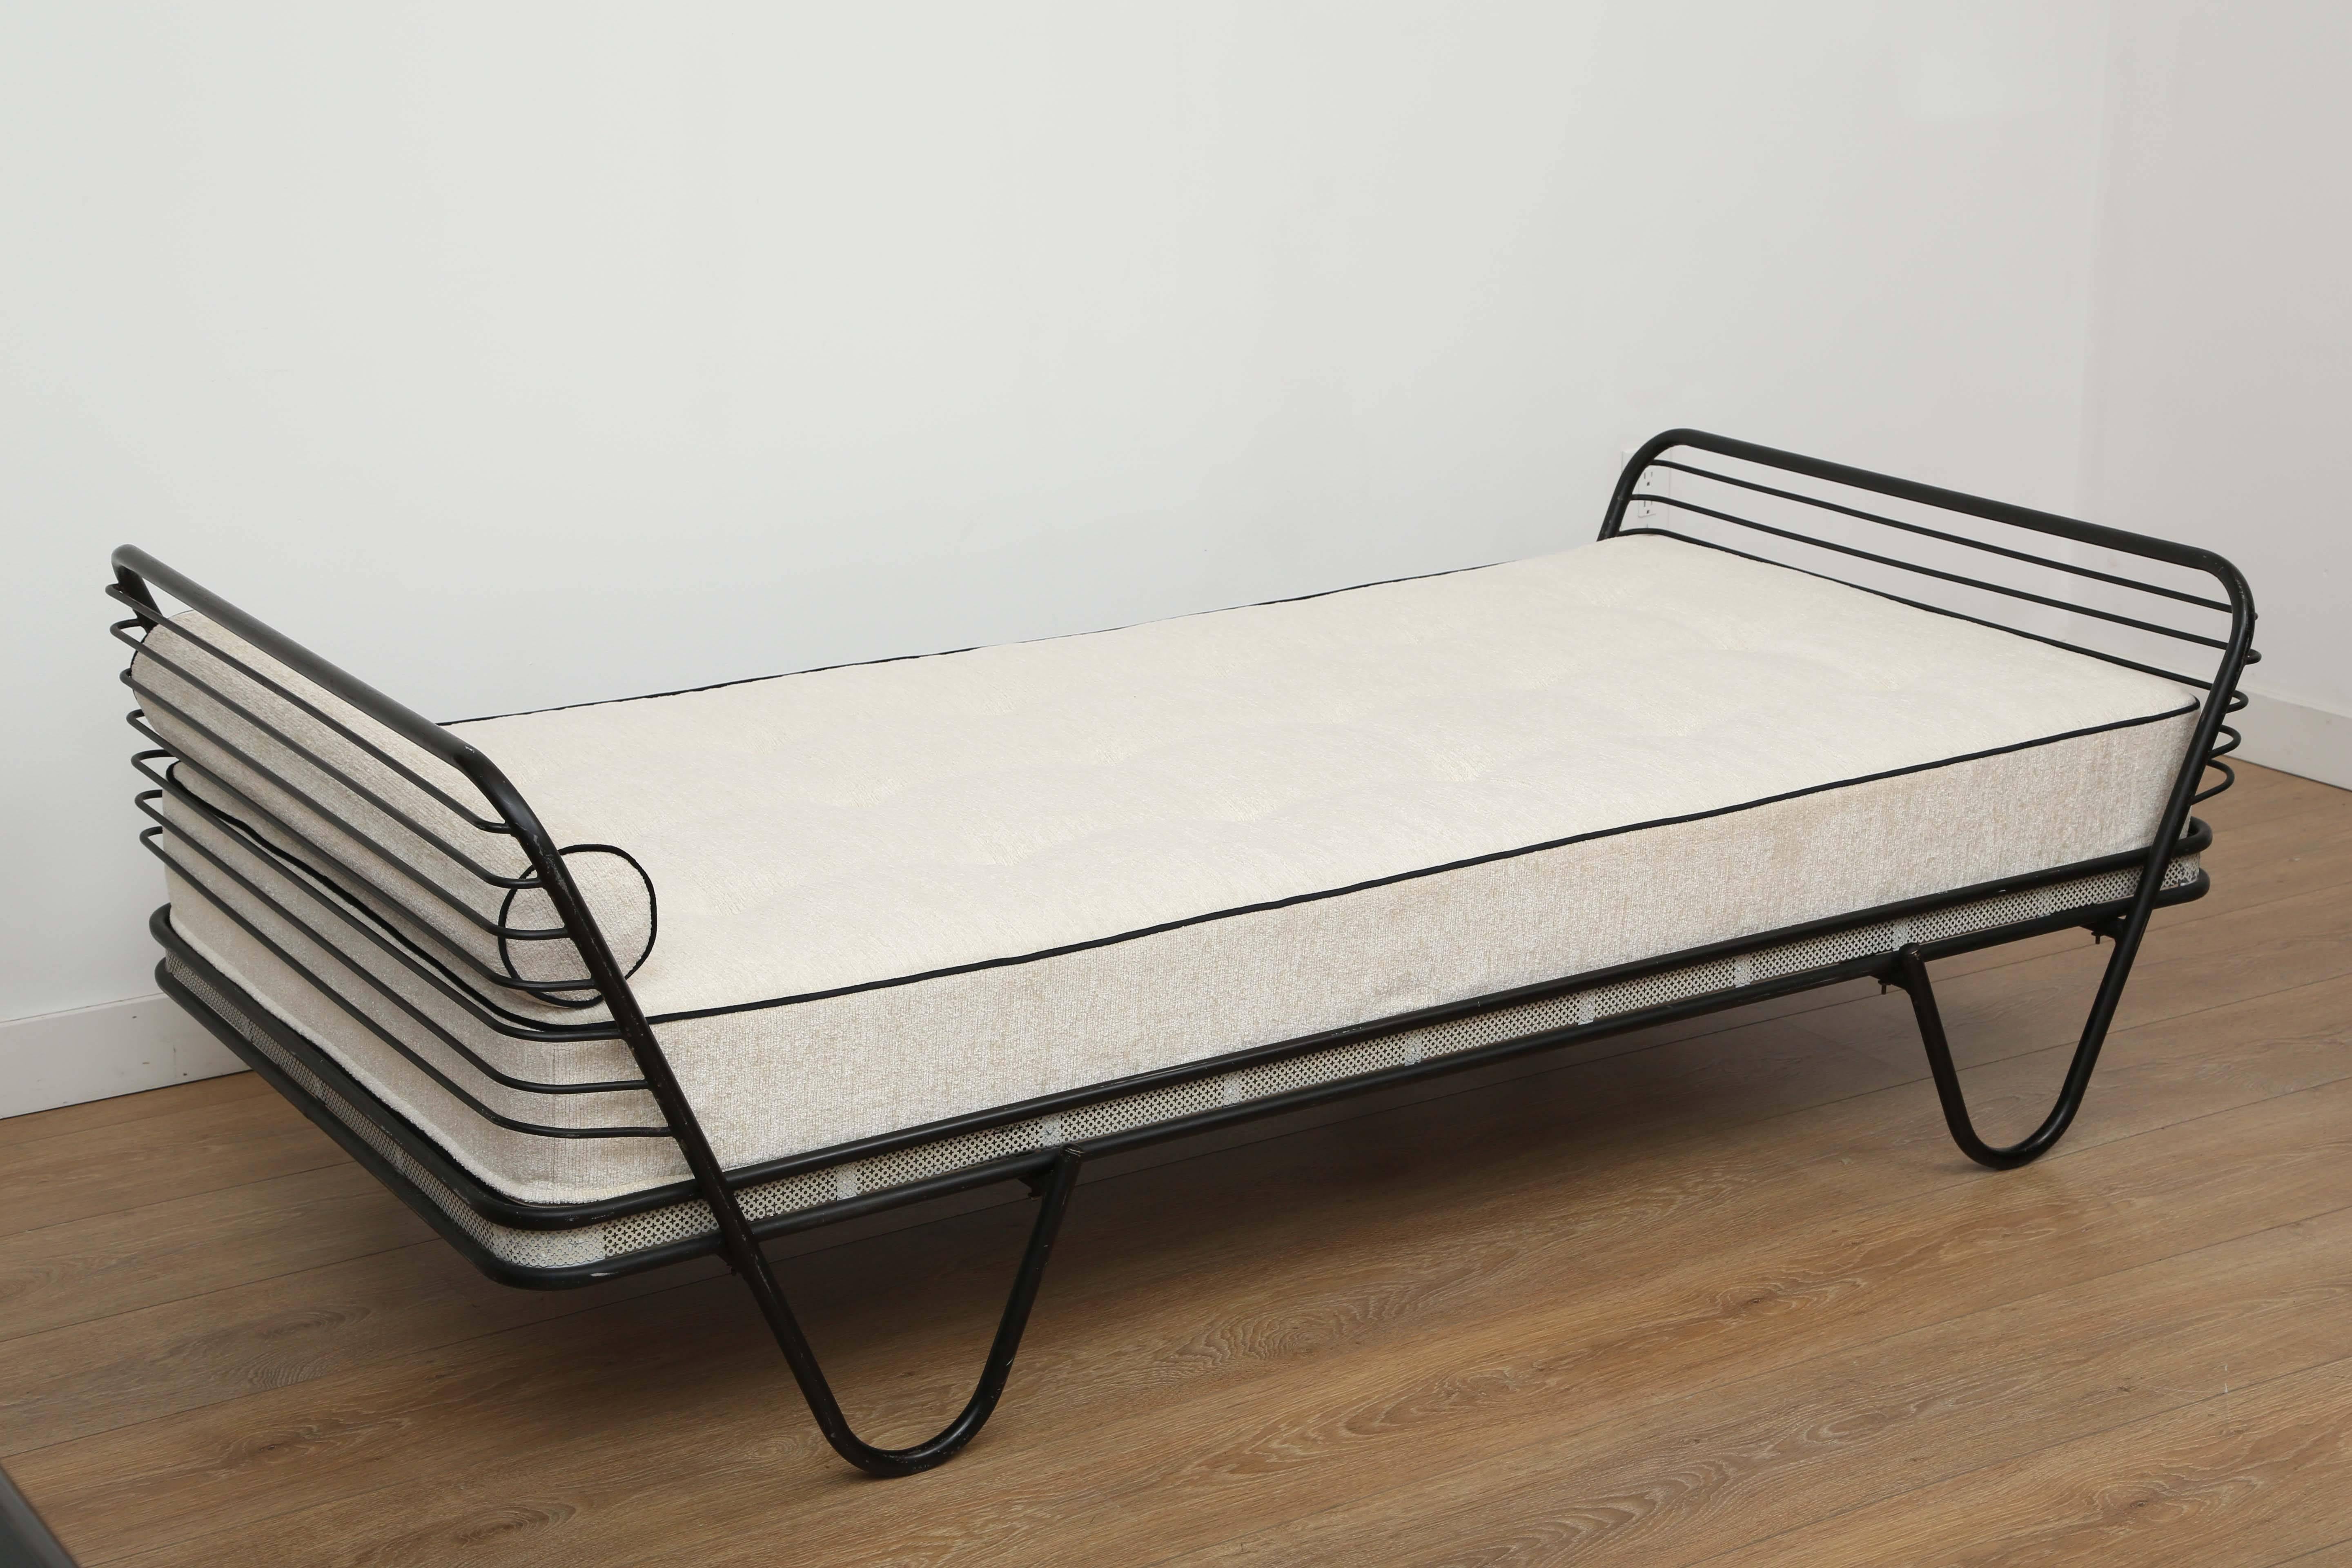 French Mid-Century Modern pair of daybeds, Kyoto model by Mathieu Matégot.
Tubular black enameled steel frame and white perforated metal gallery with new custom-made mattress. Newly upholstered with an off white boucle with black piping.
Price is